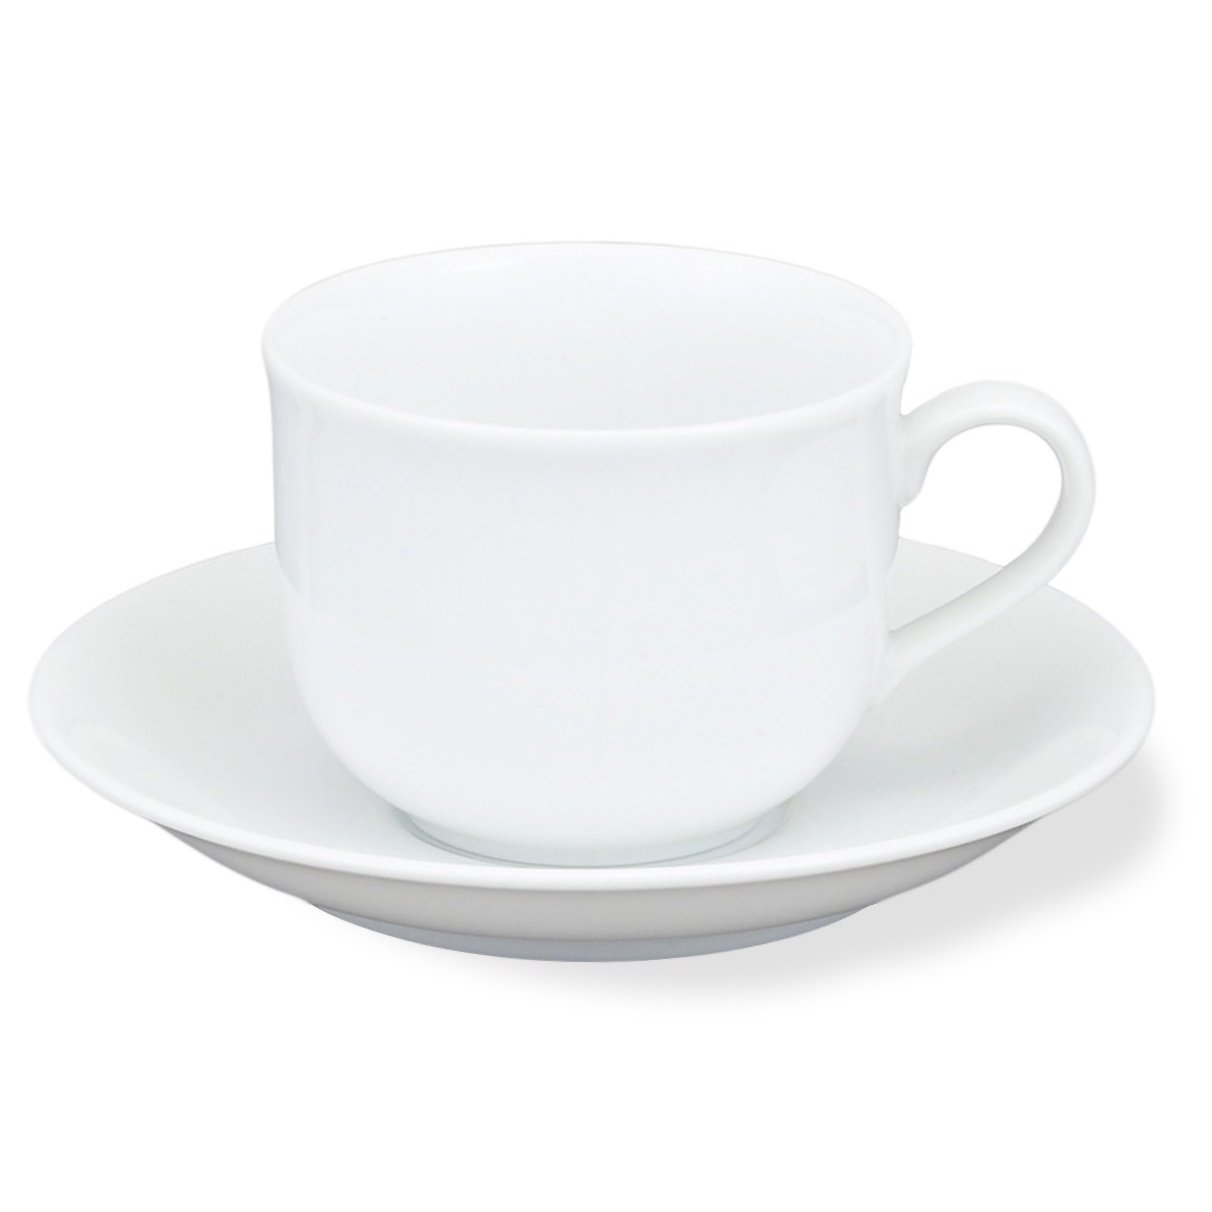 HIC 7-ounce Porcelain Coupe Cup and Saucer